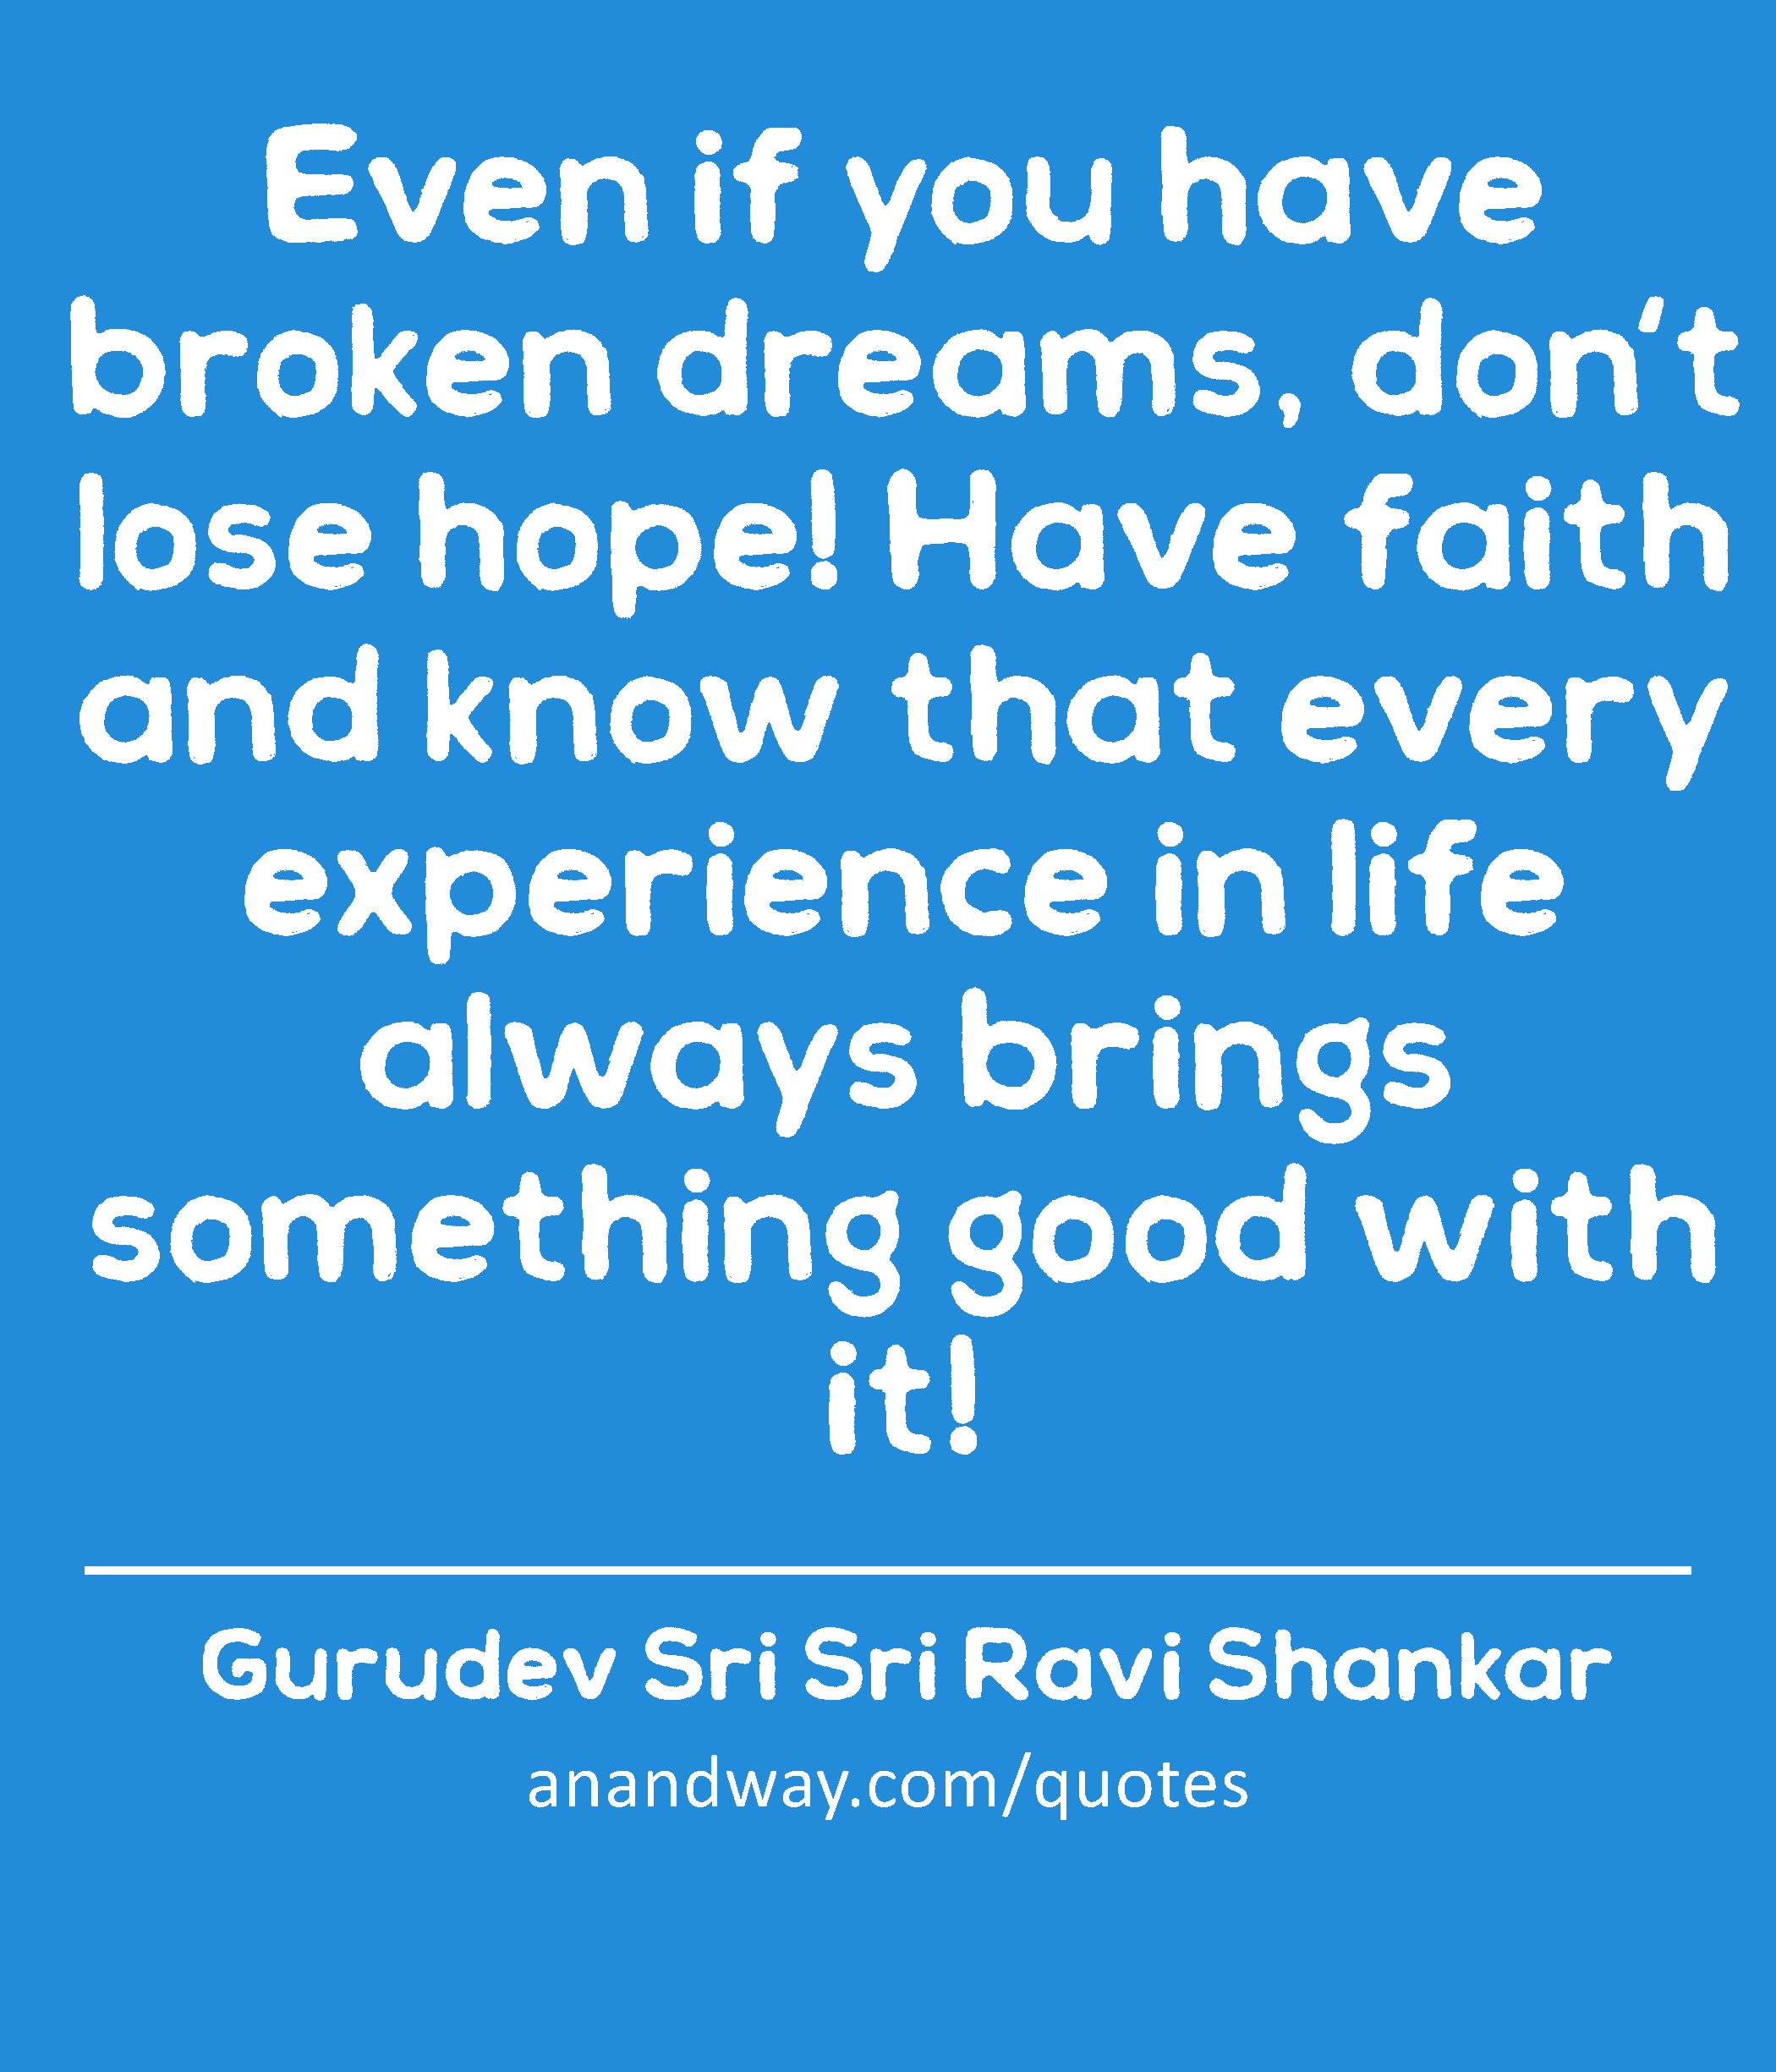 Even if you have broken dreams, don't lose hope! Have faith and know that every experience in life
 -Gurudev Sri Sri Ravi Shankar